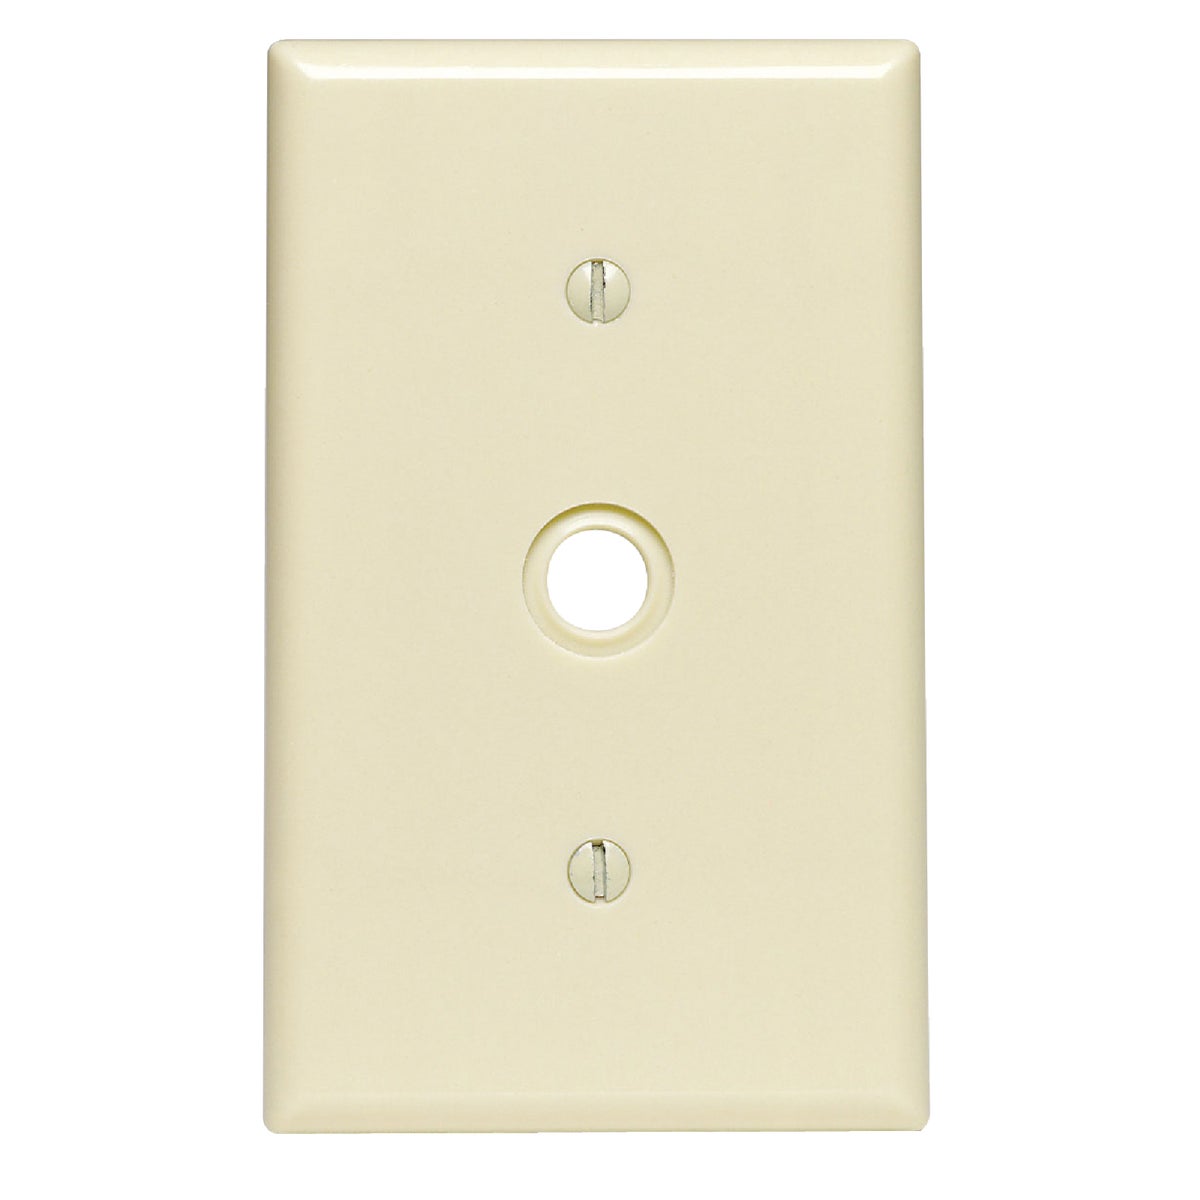 Item 521331, Durable thermoset plastic telephone cable wall plate. Features (1) 0.